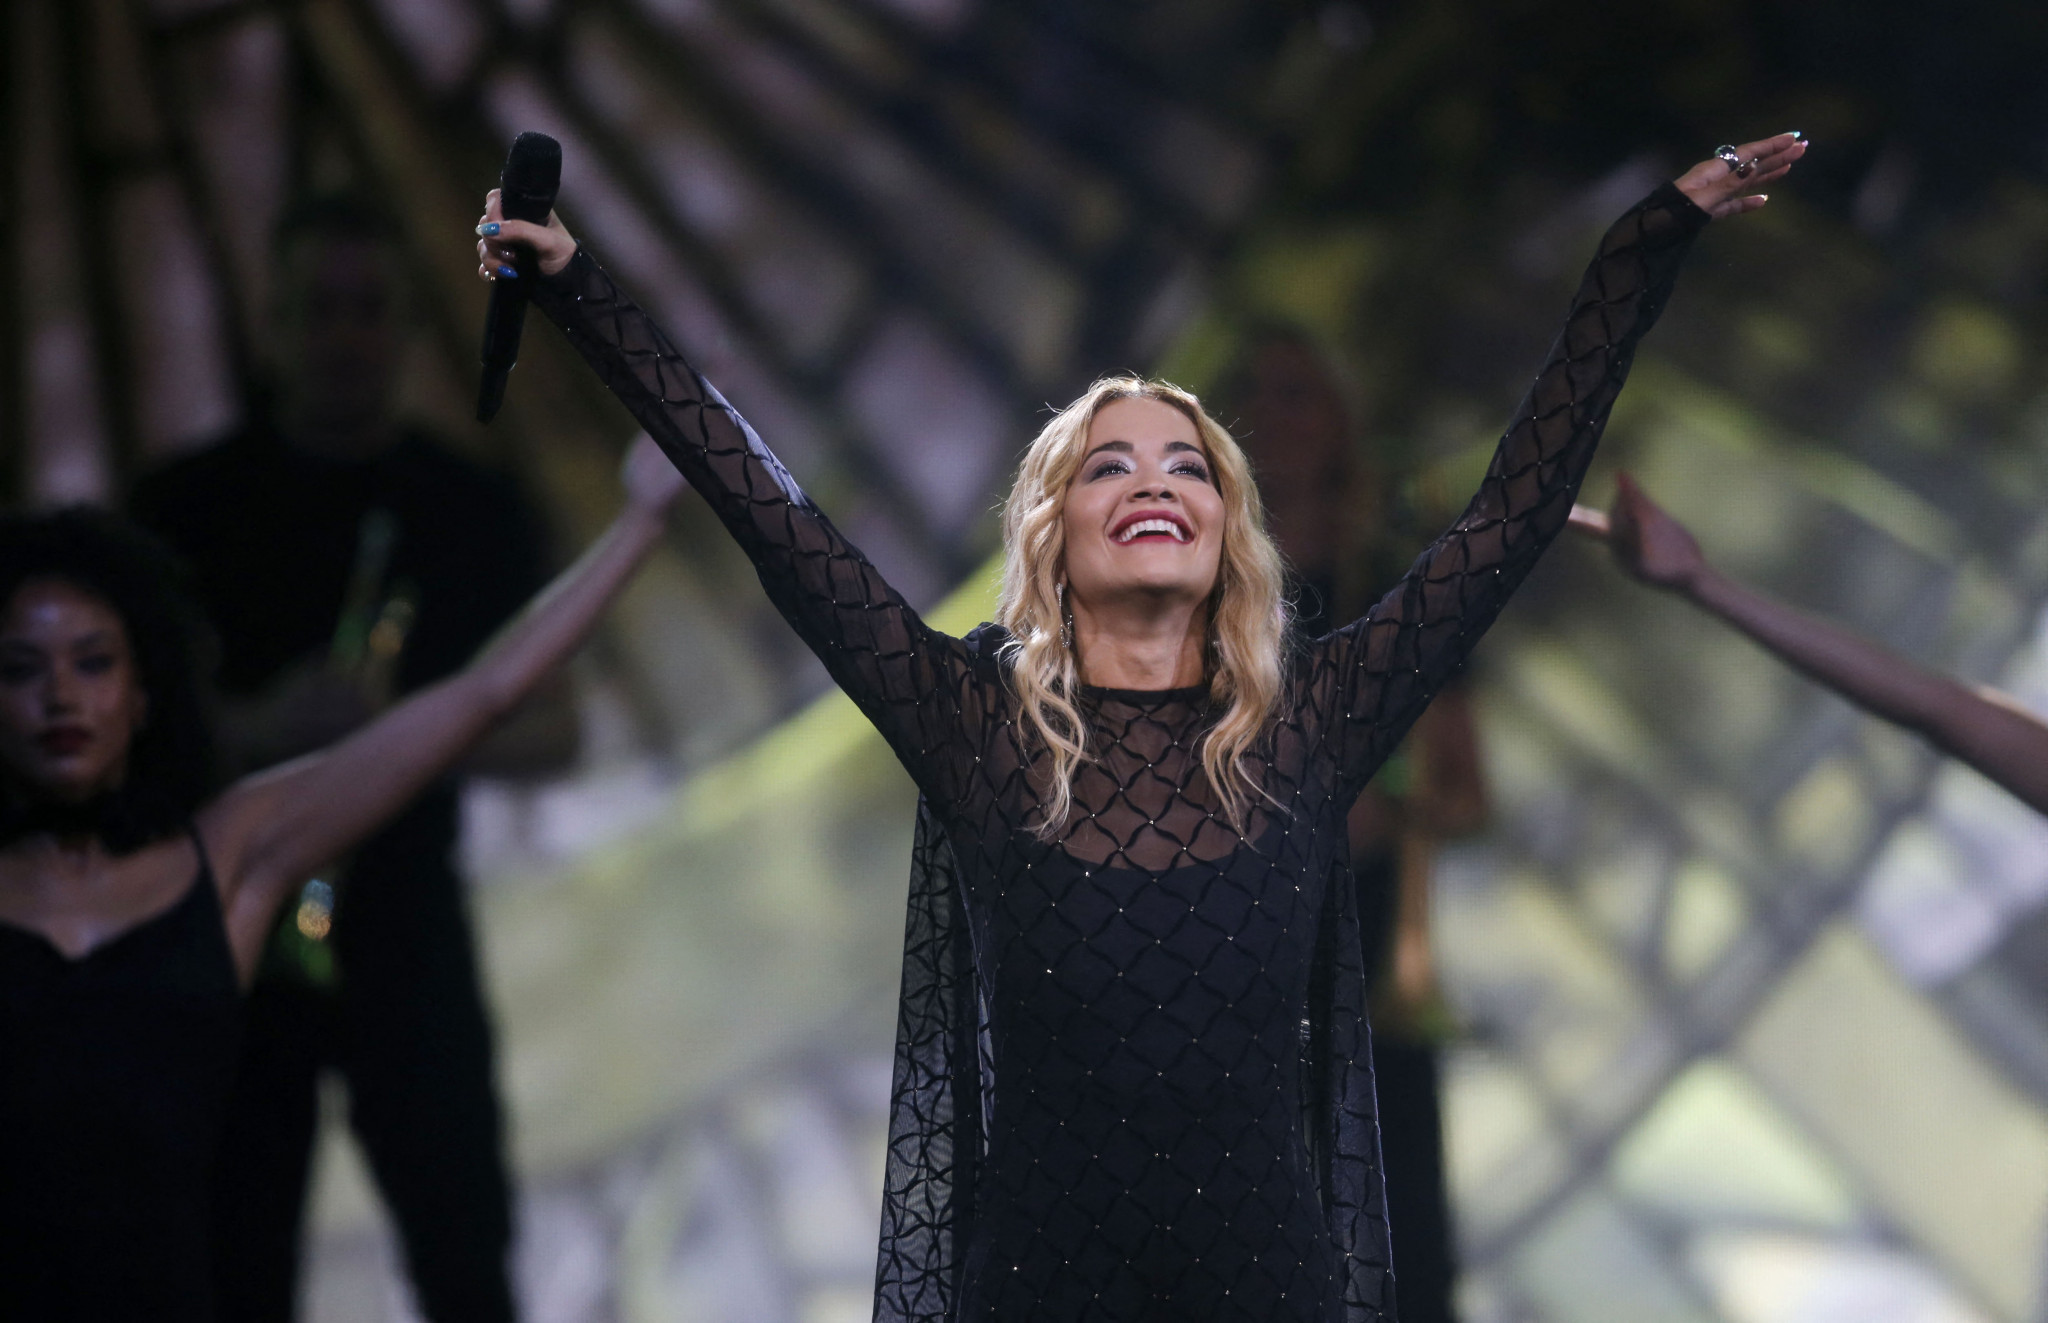 Singer-songwriter Rita Ora performs at the Closing Ceremony of the Invictus Games in Düsseldorf ©Getty Images